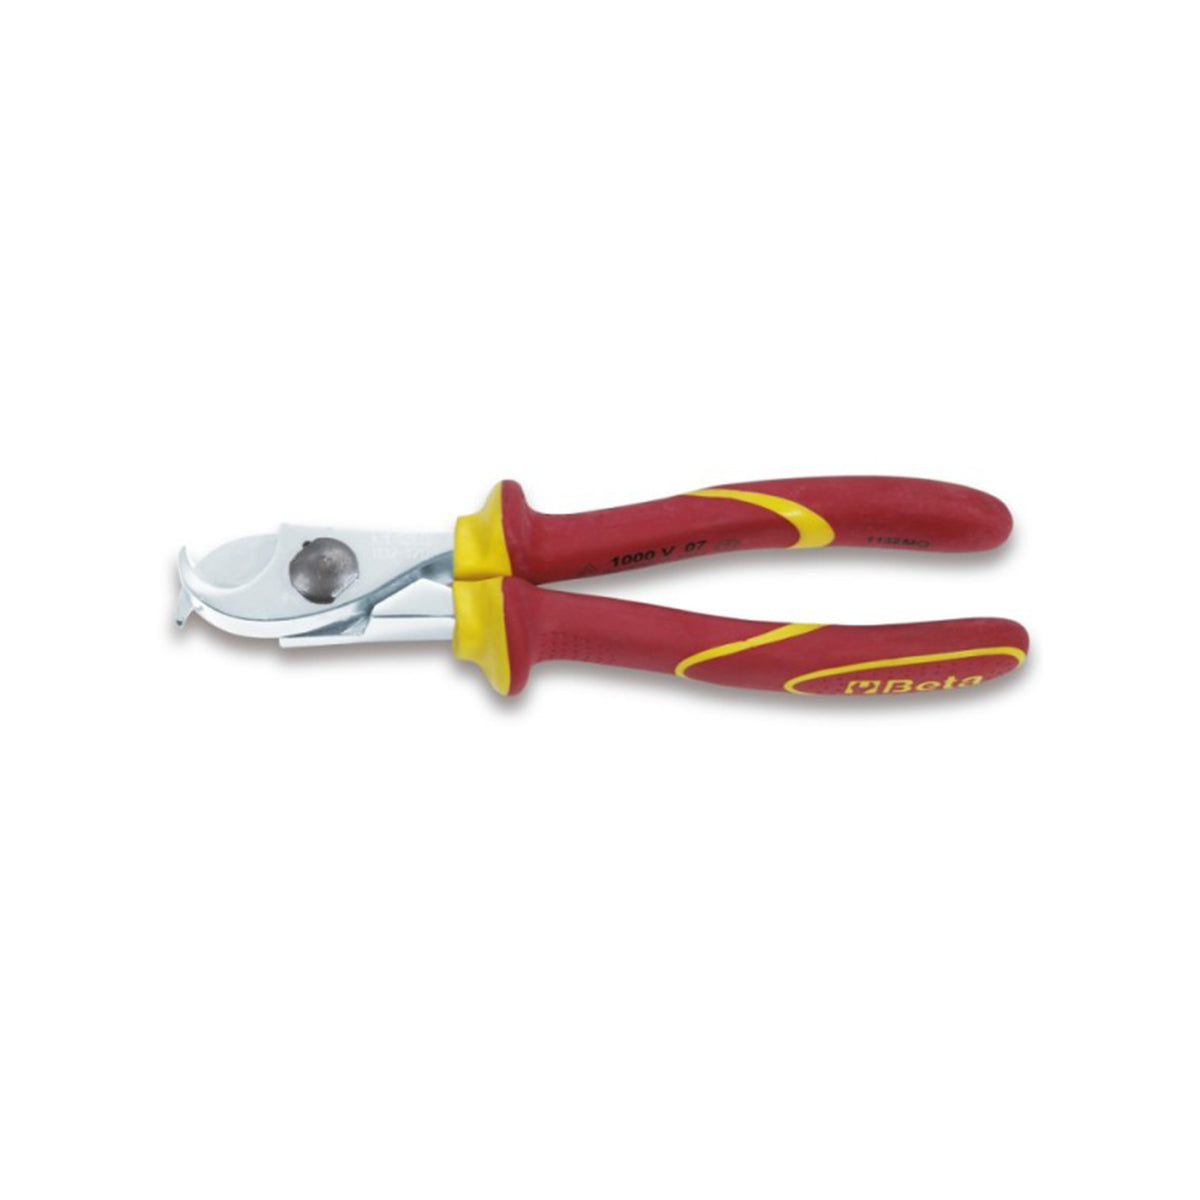 Cable cutter with insulated handles for copper and aluminium cables - Beta